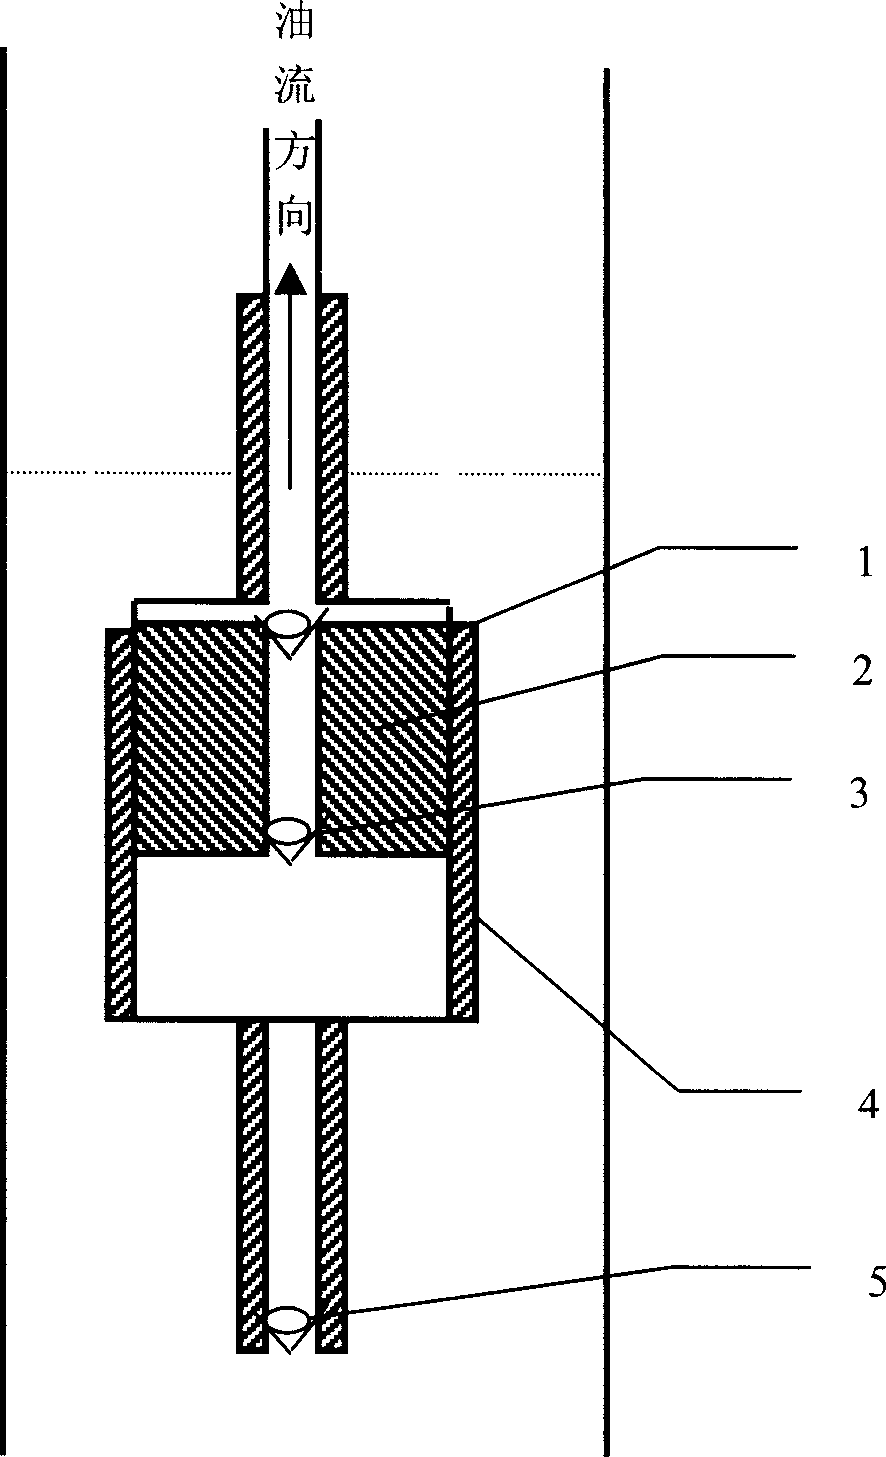 Method of using linear dynamo oil recovery and linear dynamo oil pump